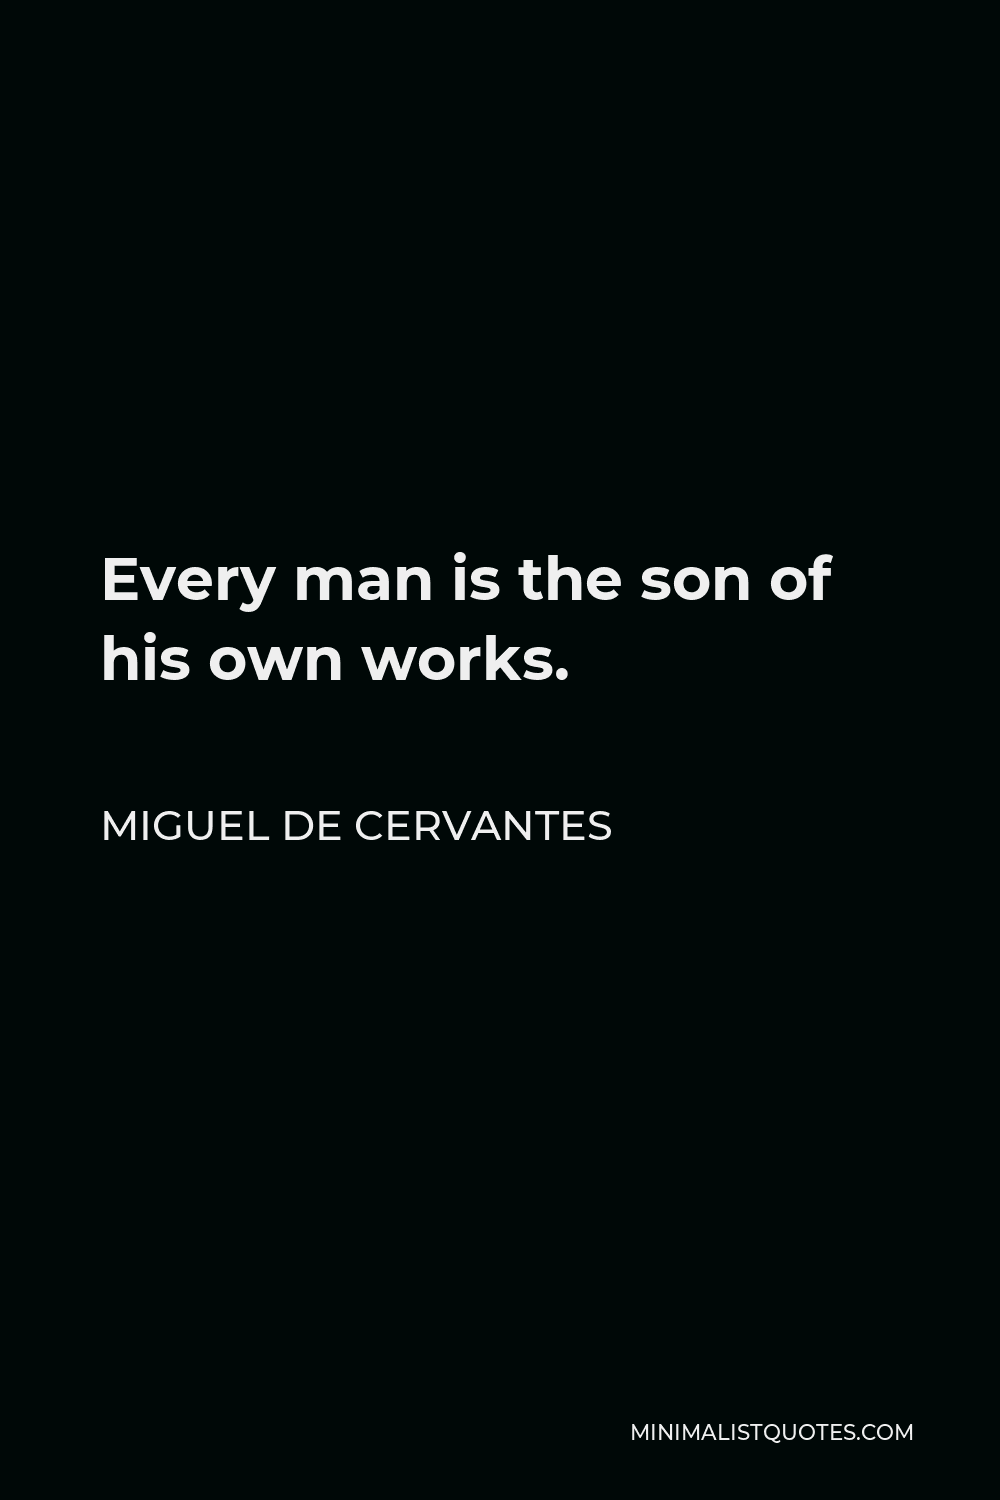 Miguel de Cervantes Quote - Every man is the son of his own works.